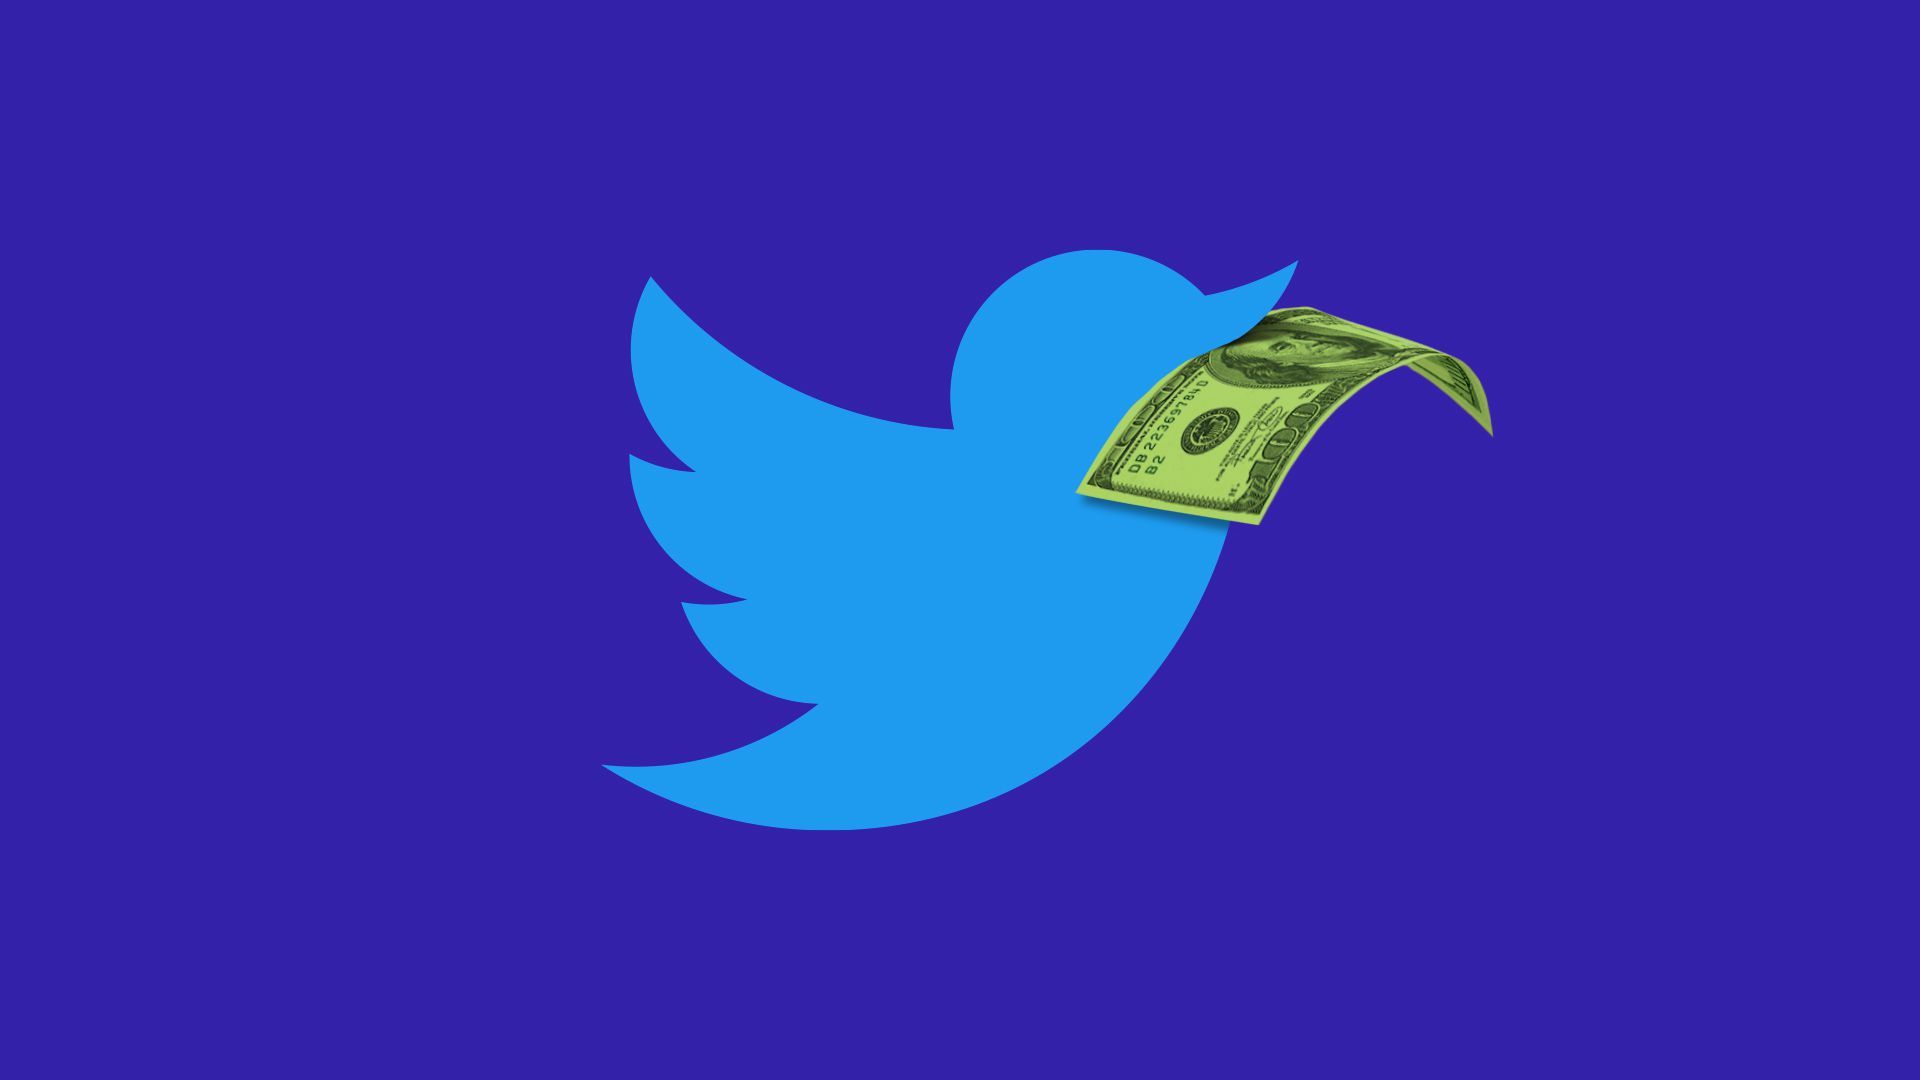 Illustration of the Twitter bird with a hundred dollar bill in its beak.   